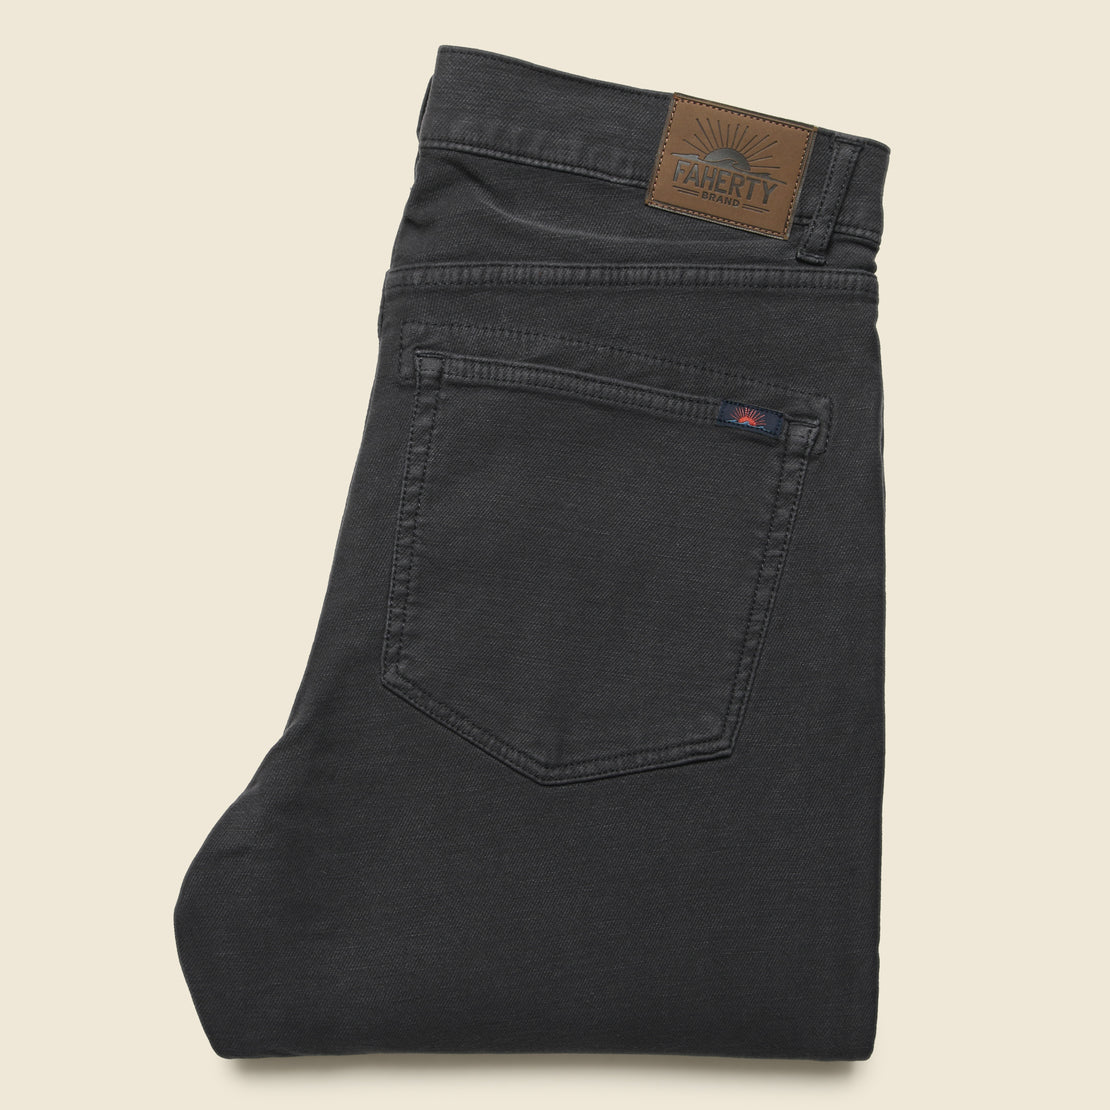 Stretch Terry Pant - Onyx Black - Faherty - STAG Provisions - Pants - Twill